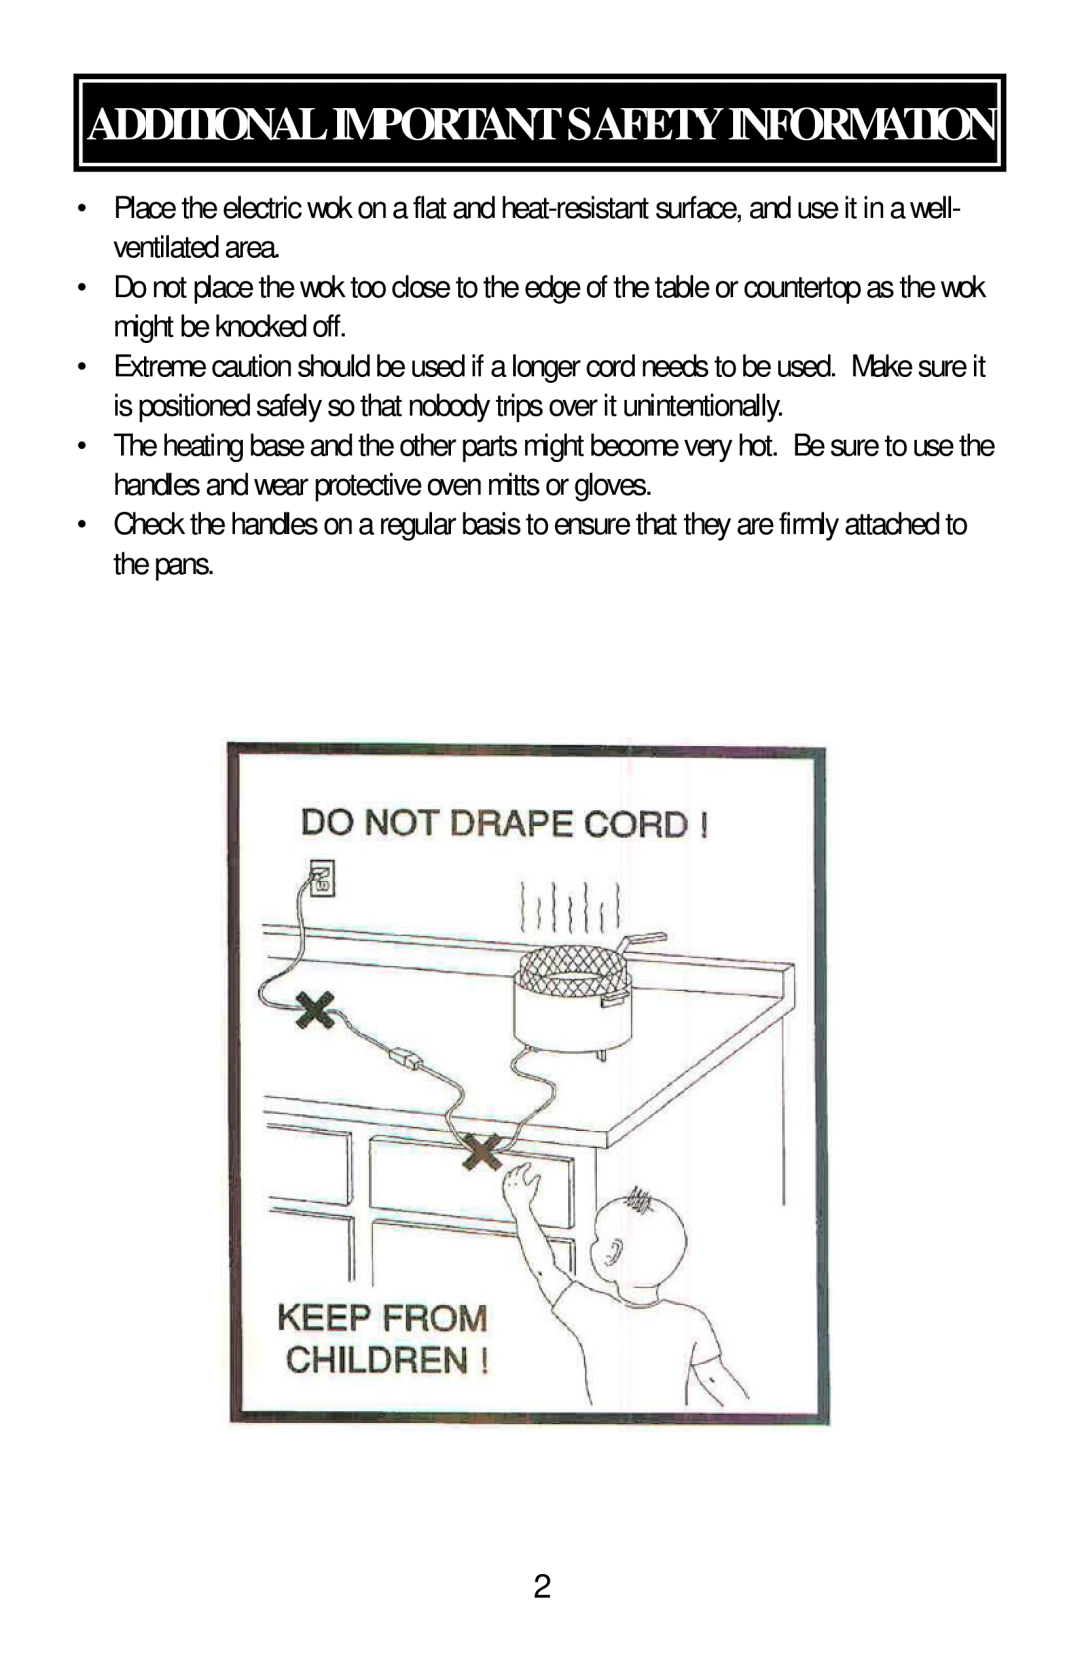 Aroma ARC-700 instruction manual Additional Important Safety Information 